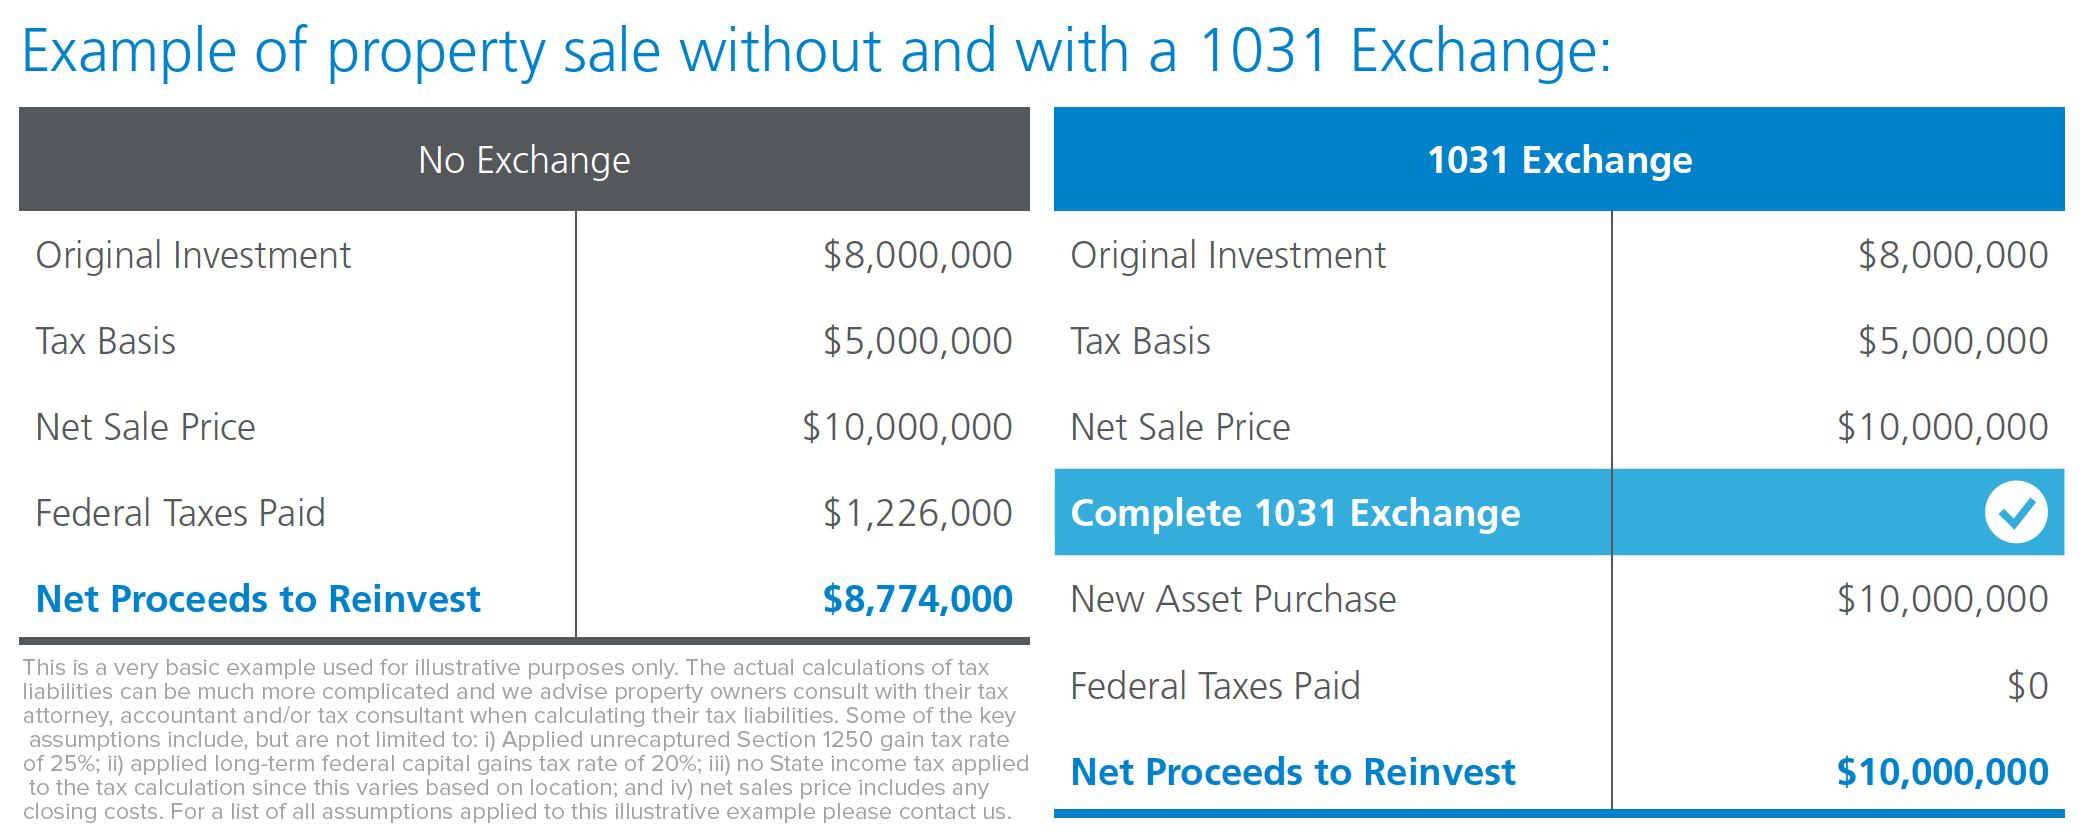 What is a 1031 Exchange?